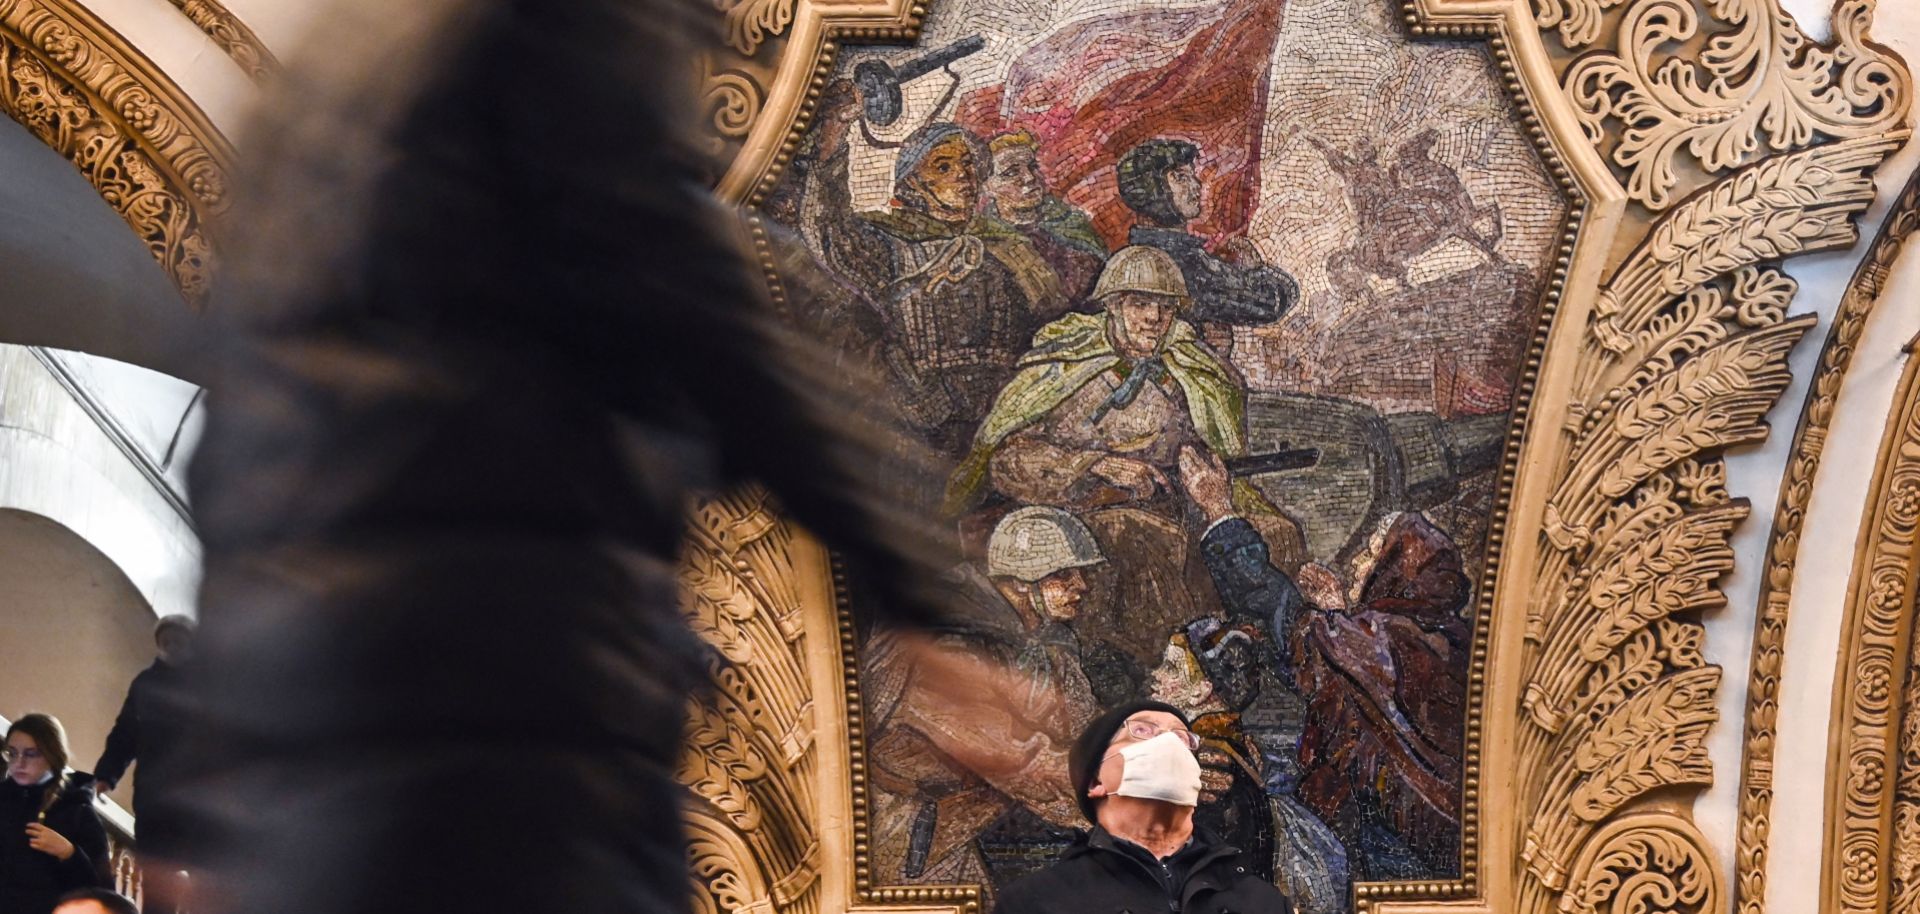 A photo taken at a Moscow metro station on March 1, 2022, shows a mosaic panel depicting the liberation of Kyiv by Russia's Red Army in 1943.